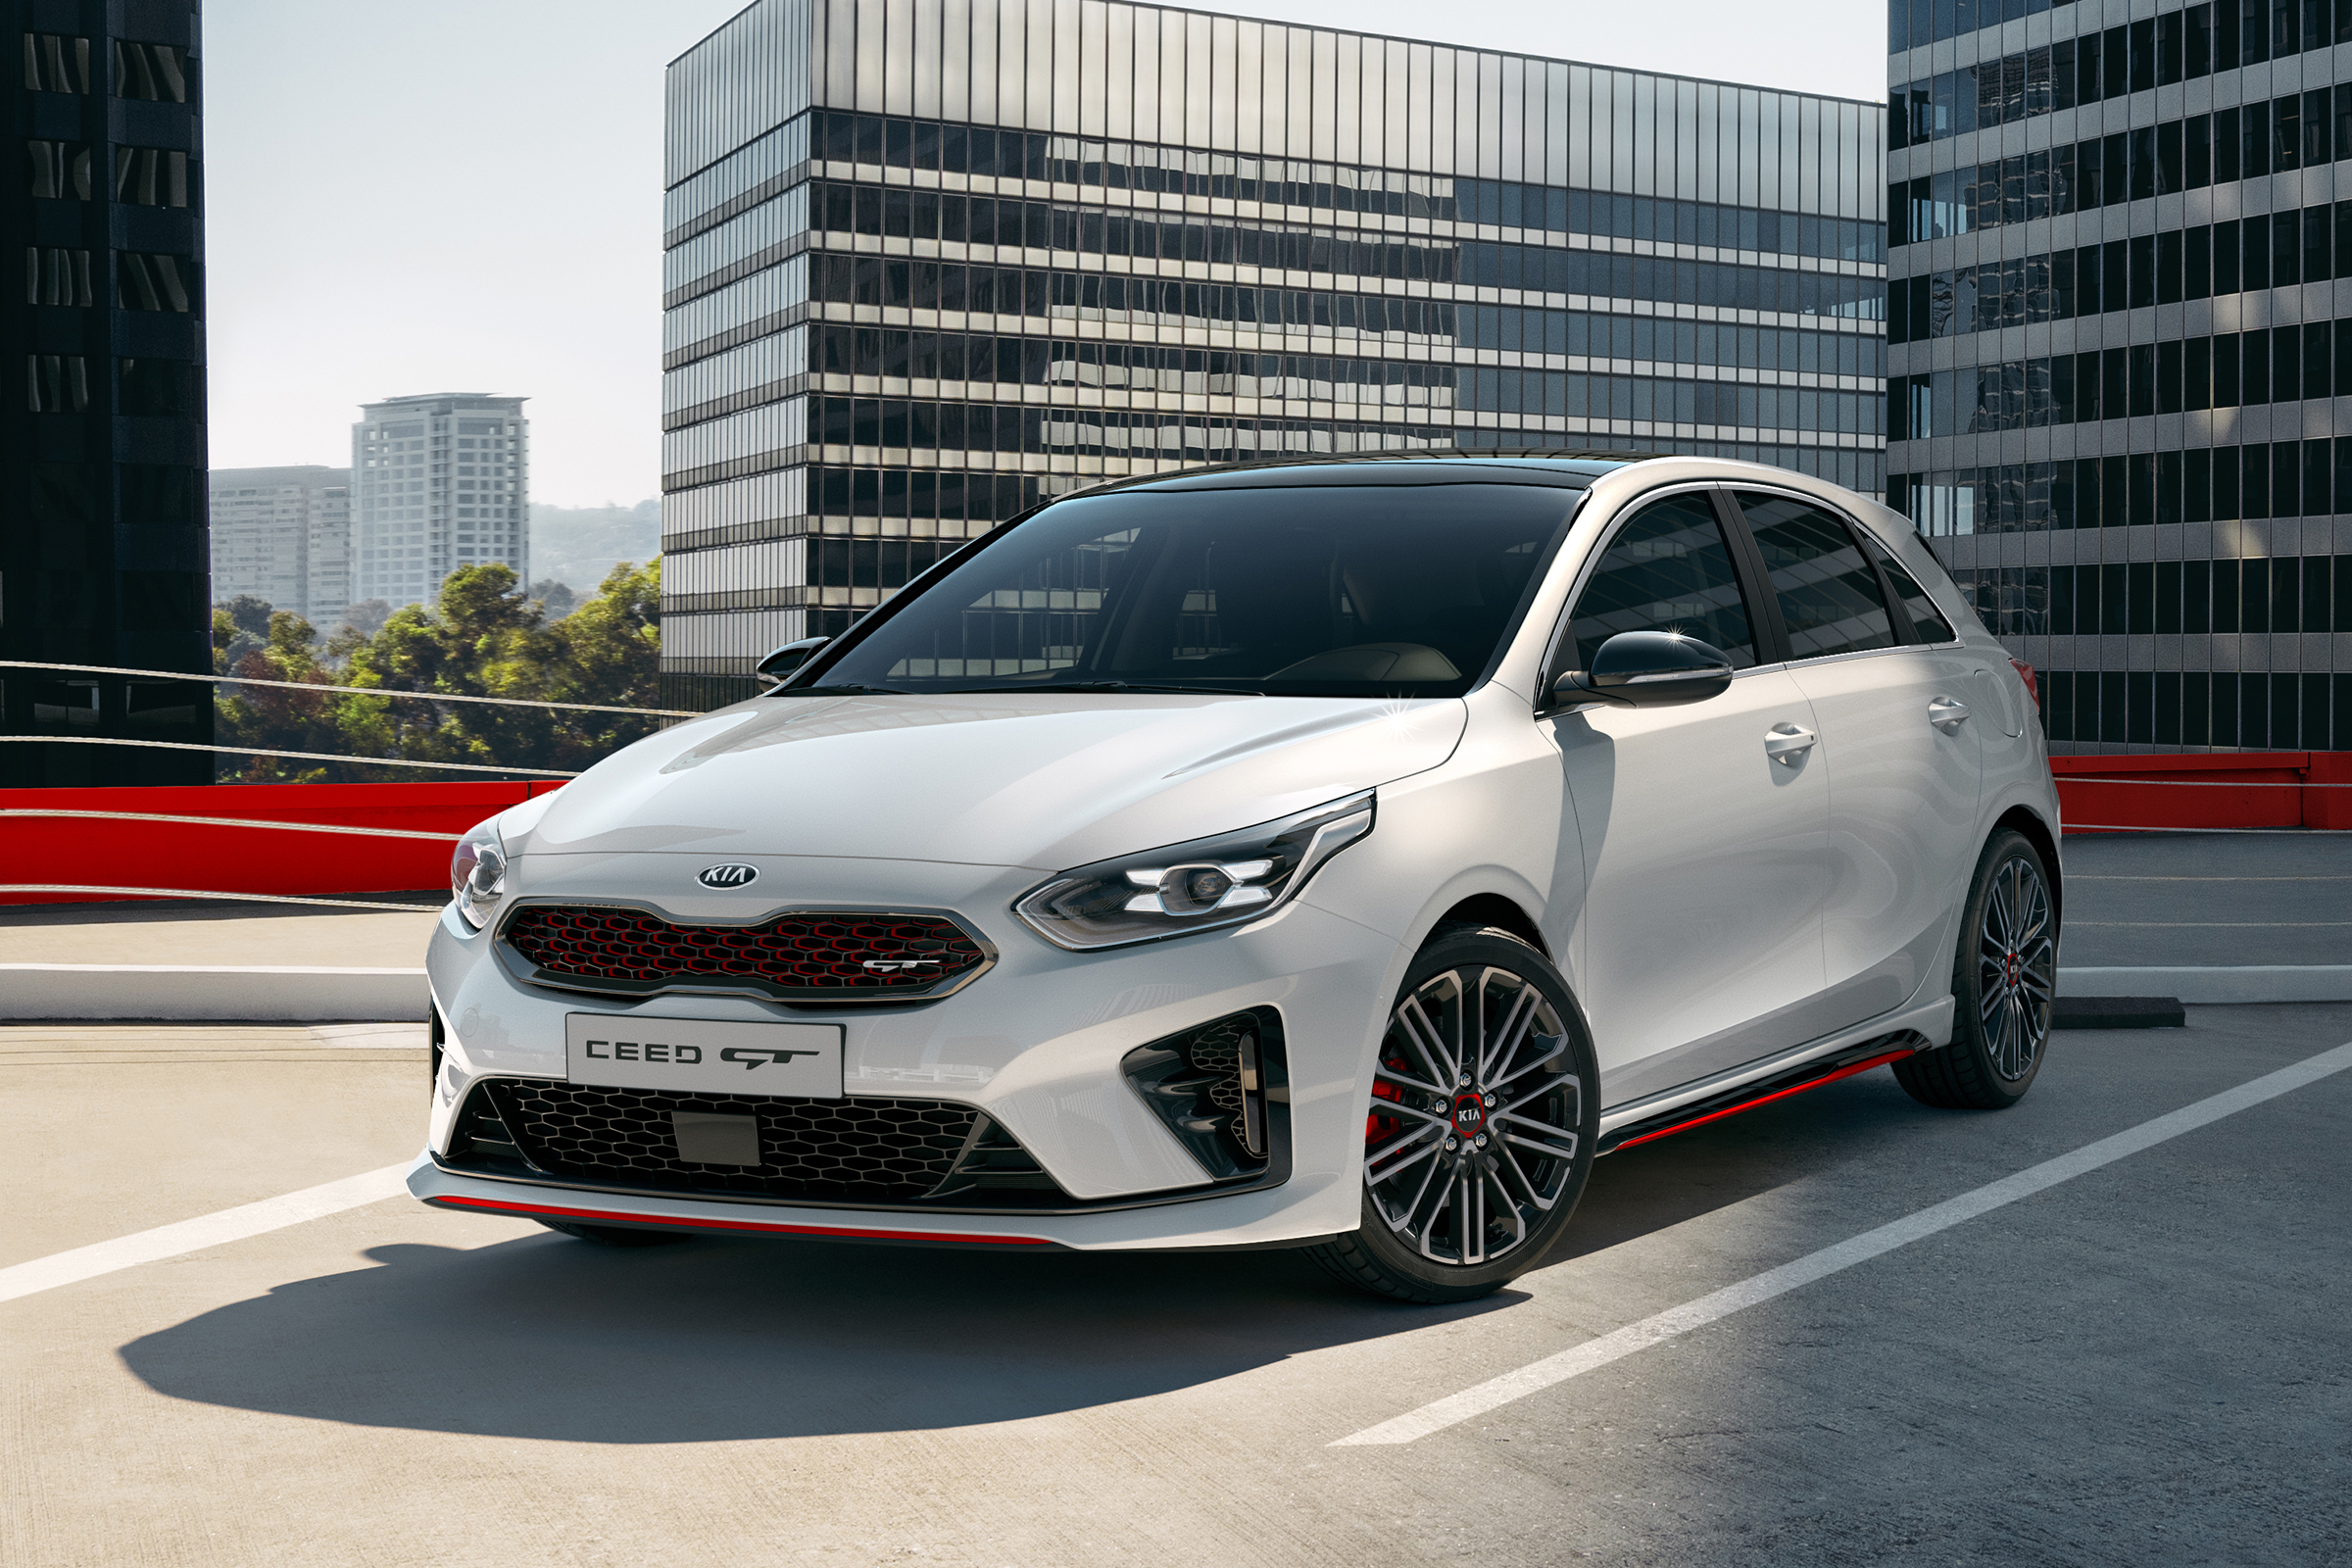 New 2019 Kia Ceed GT prices, specifications and release